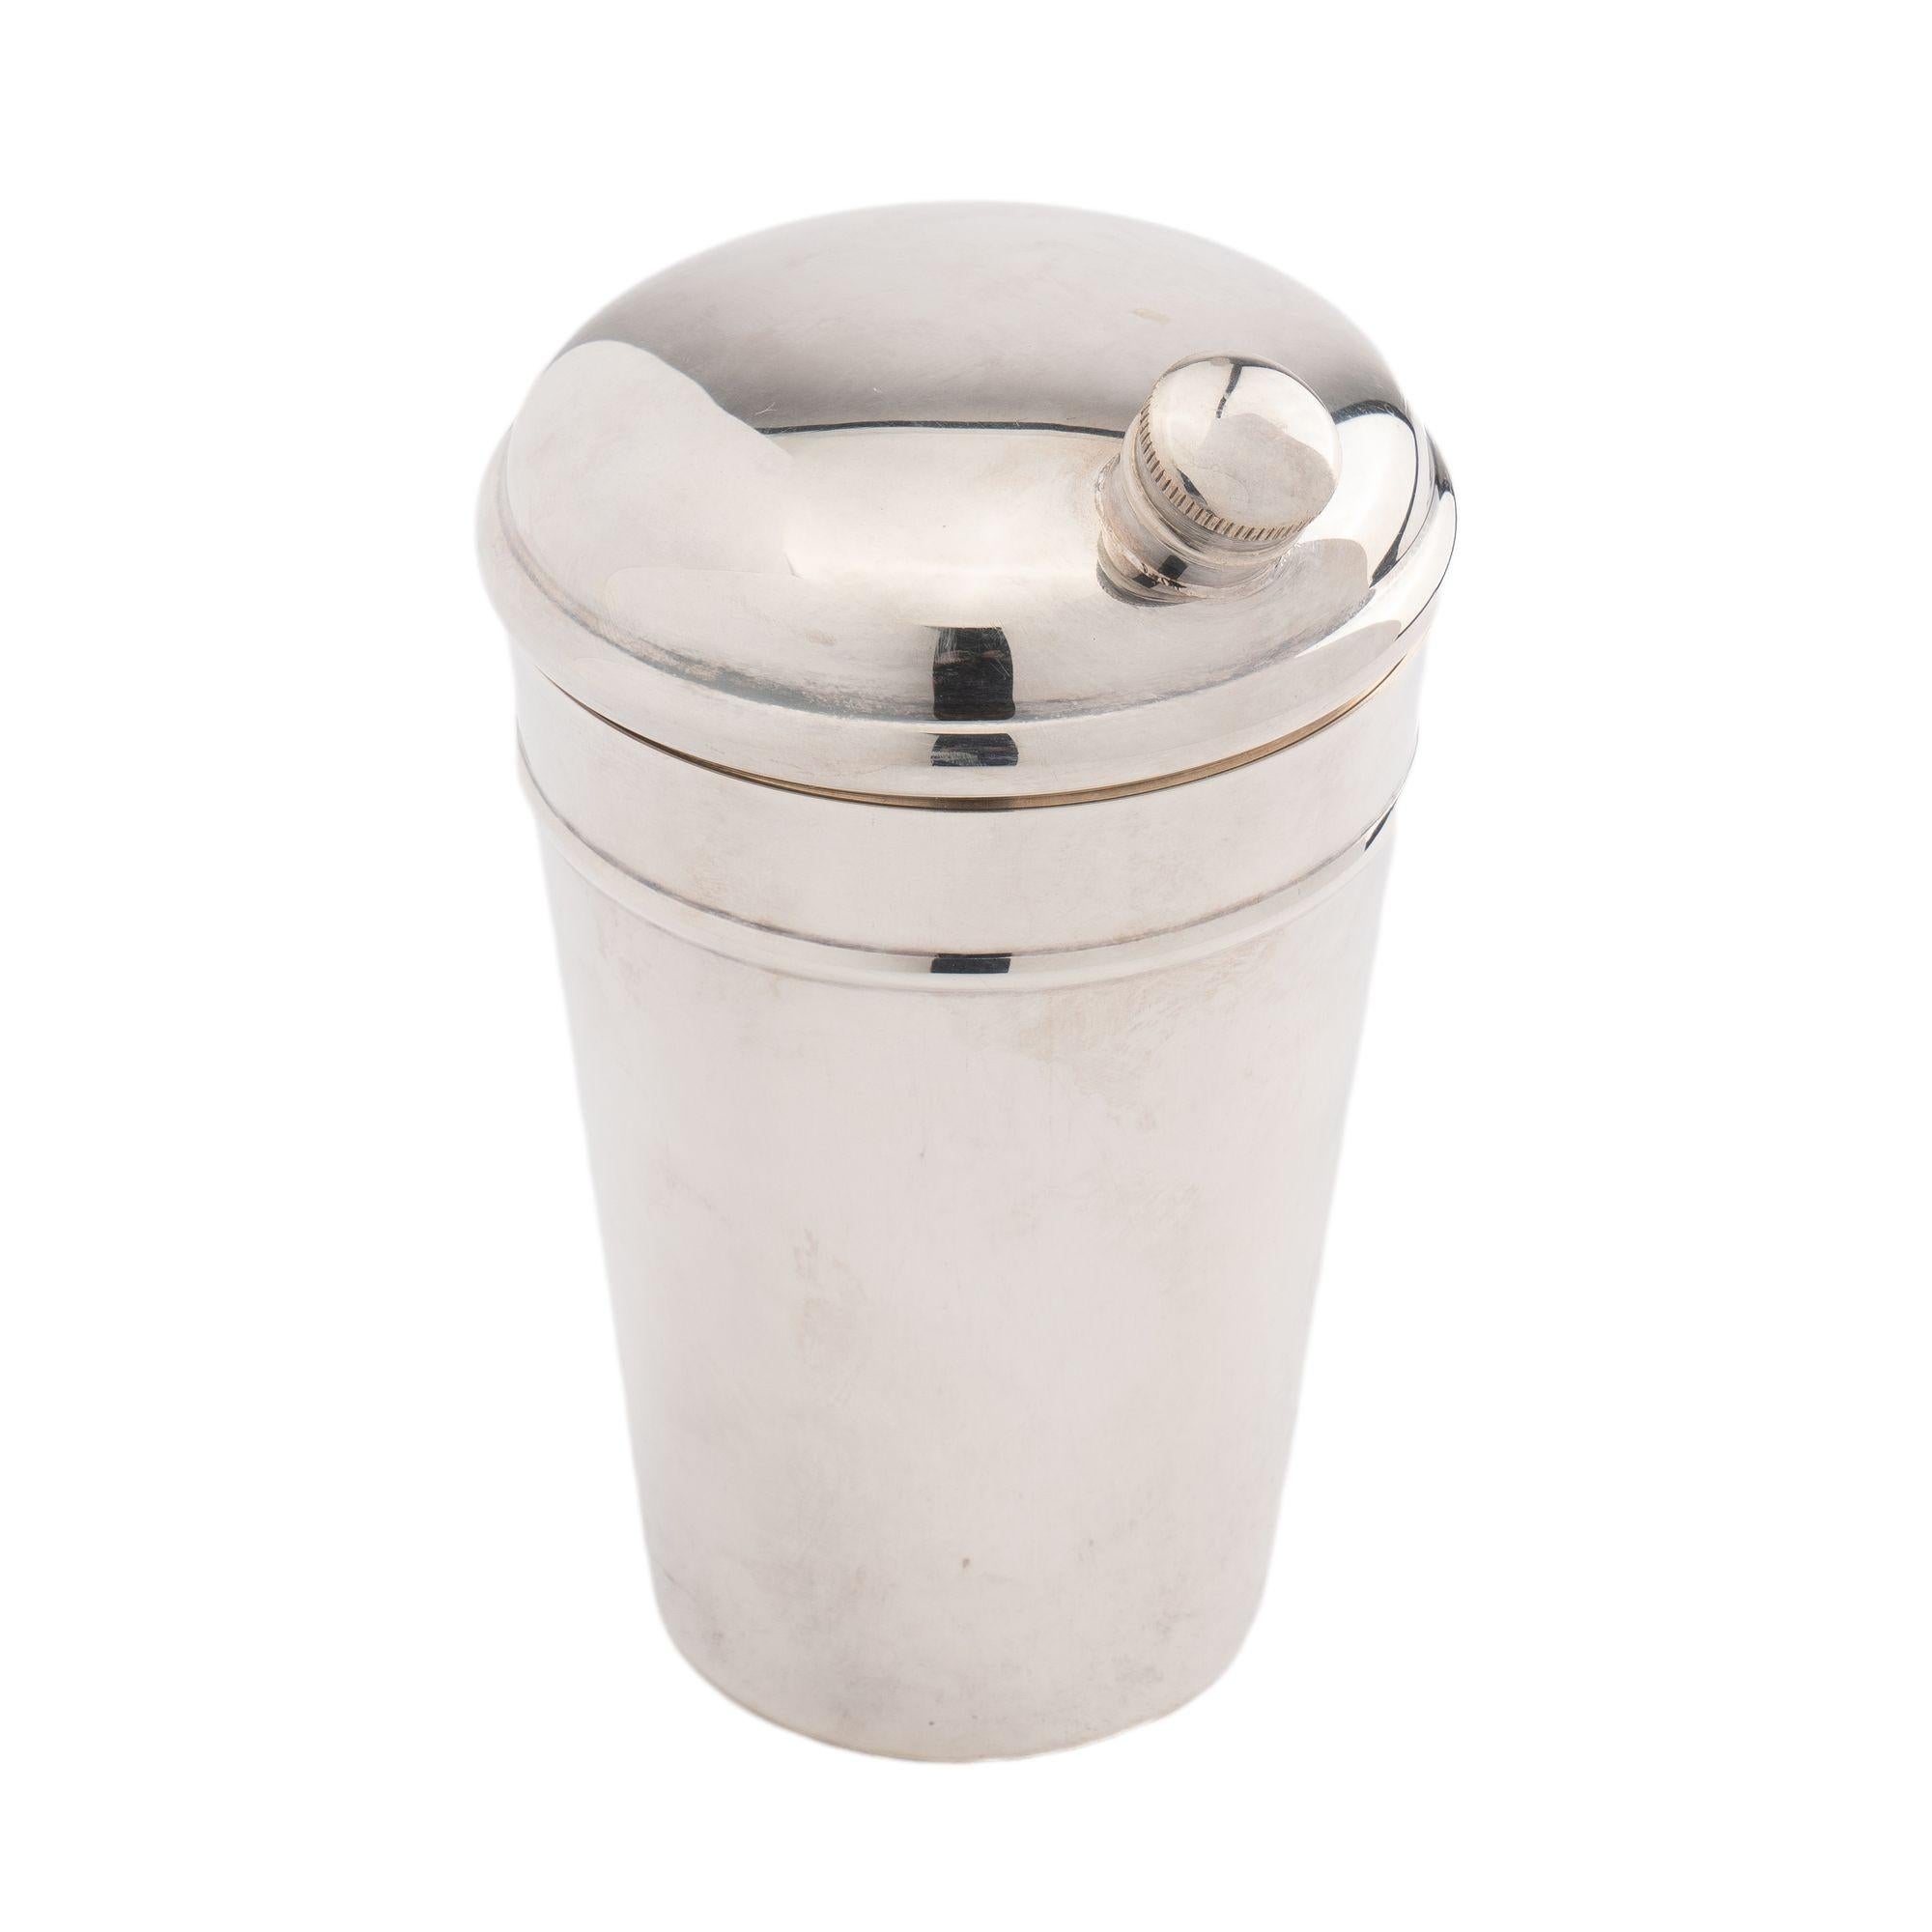 Tapered cylinder shape silver plated cocktail shaker with threaded pouring spout on a pressure fitted removable domed lid.
Stamped on the underside: Gorham, YC43

American, mid 20th century.